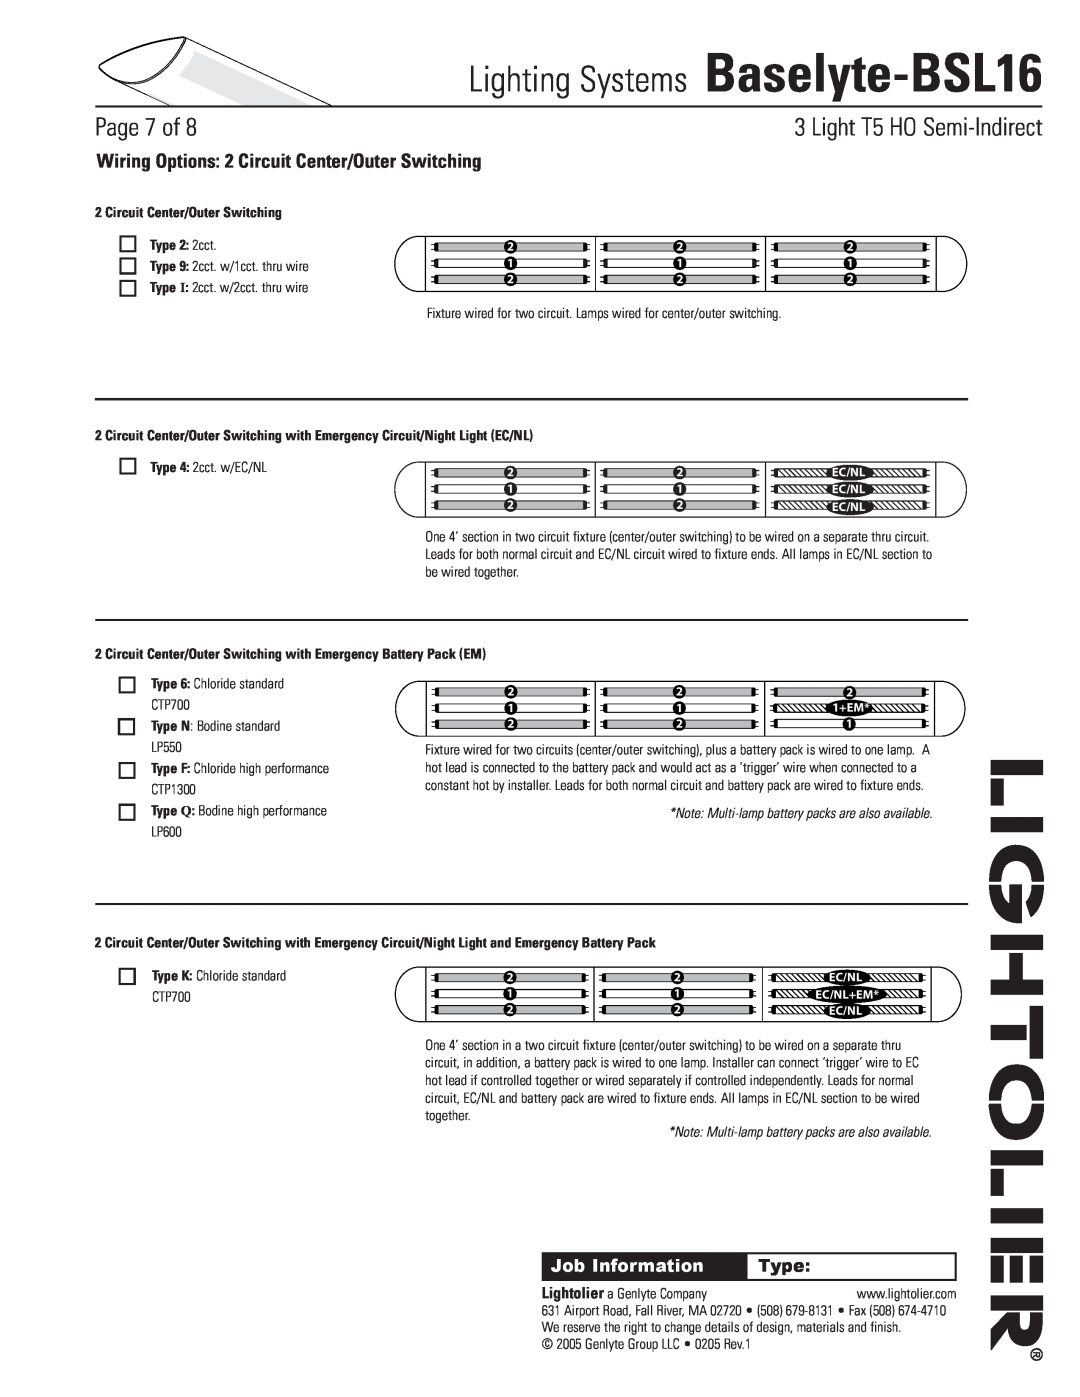 Lightolier Baselyte-BSL16 Wiring Options 2 Circuit Center/Outer Switching, Circuit Center/Outer Switching Type 2 2cct 